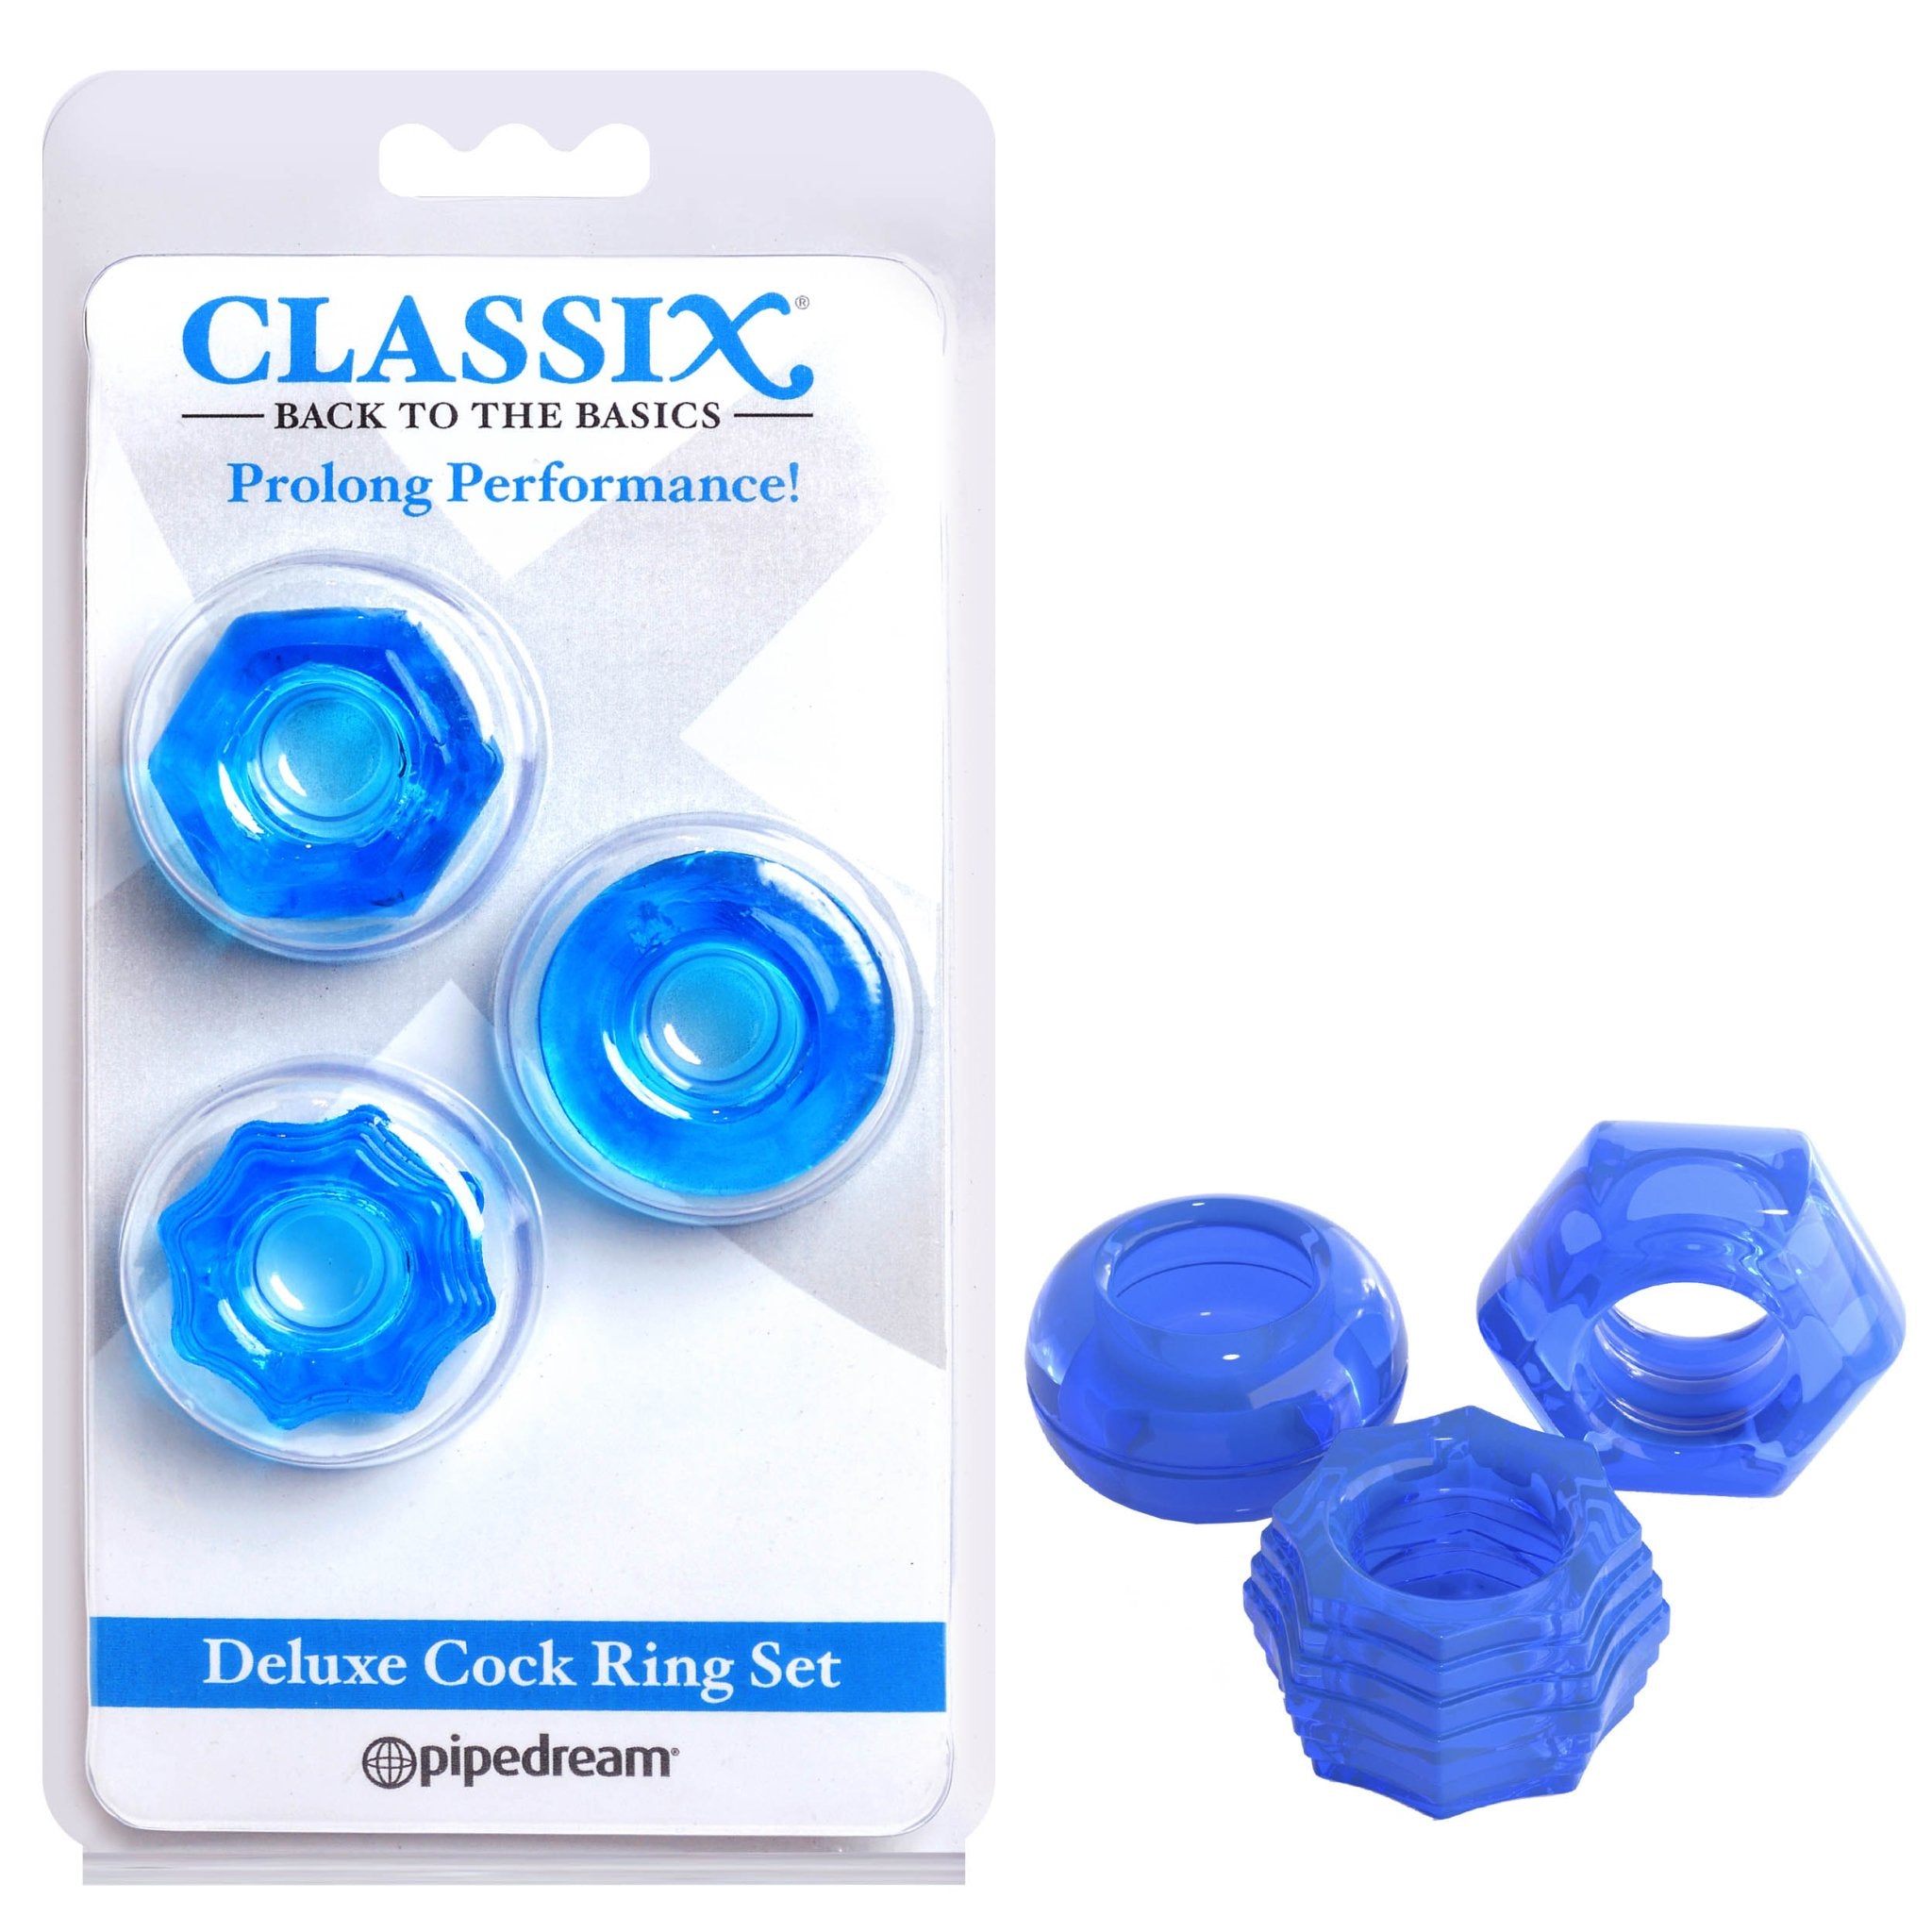 Classix - deluxe cock ring set - Product front view and box front view | Flirtybay.com.au